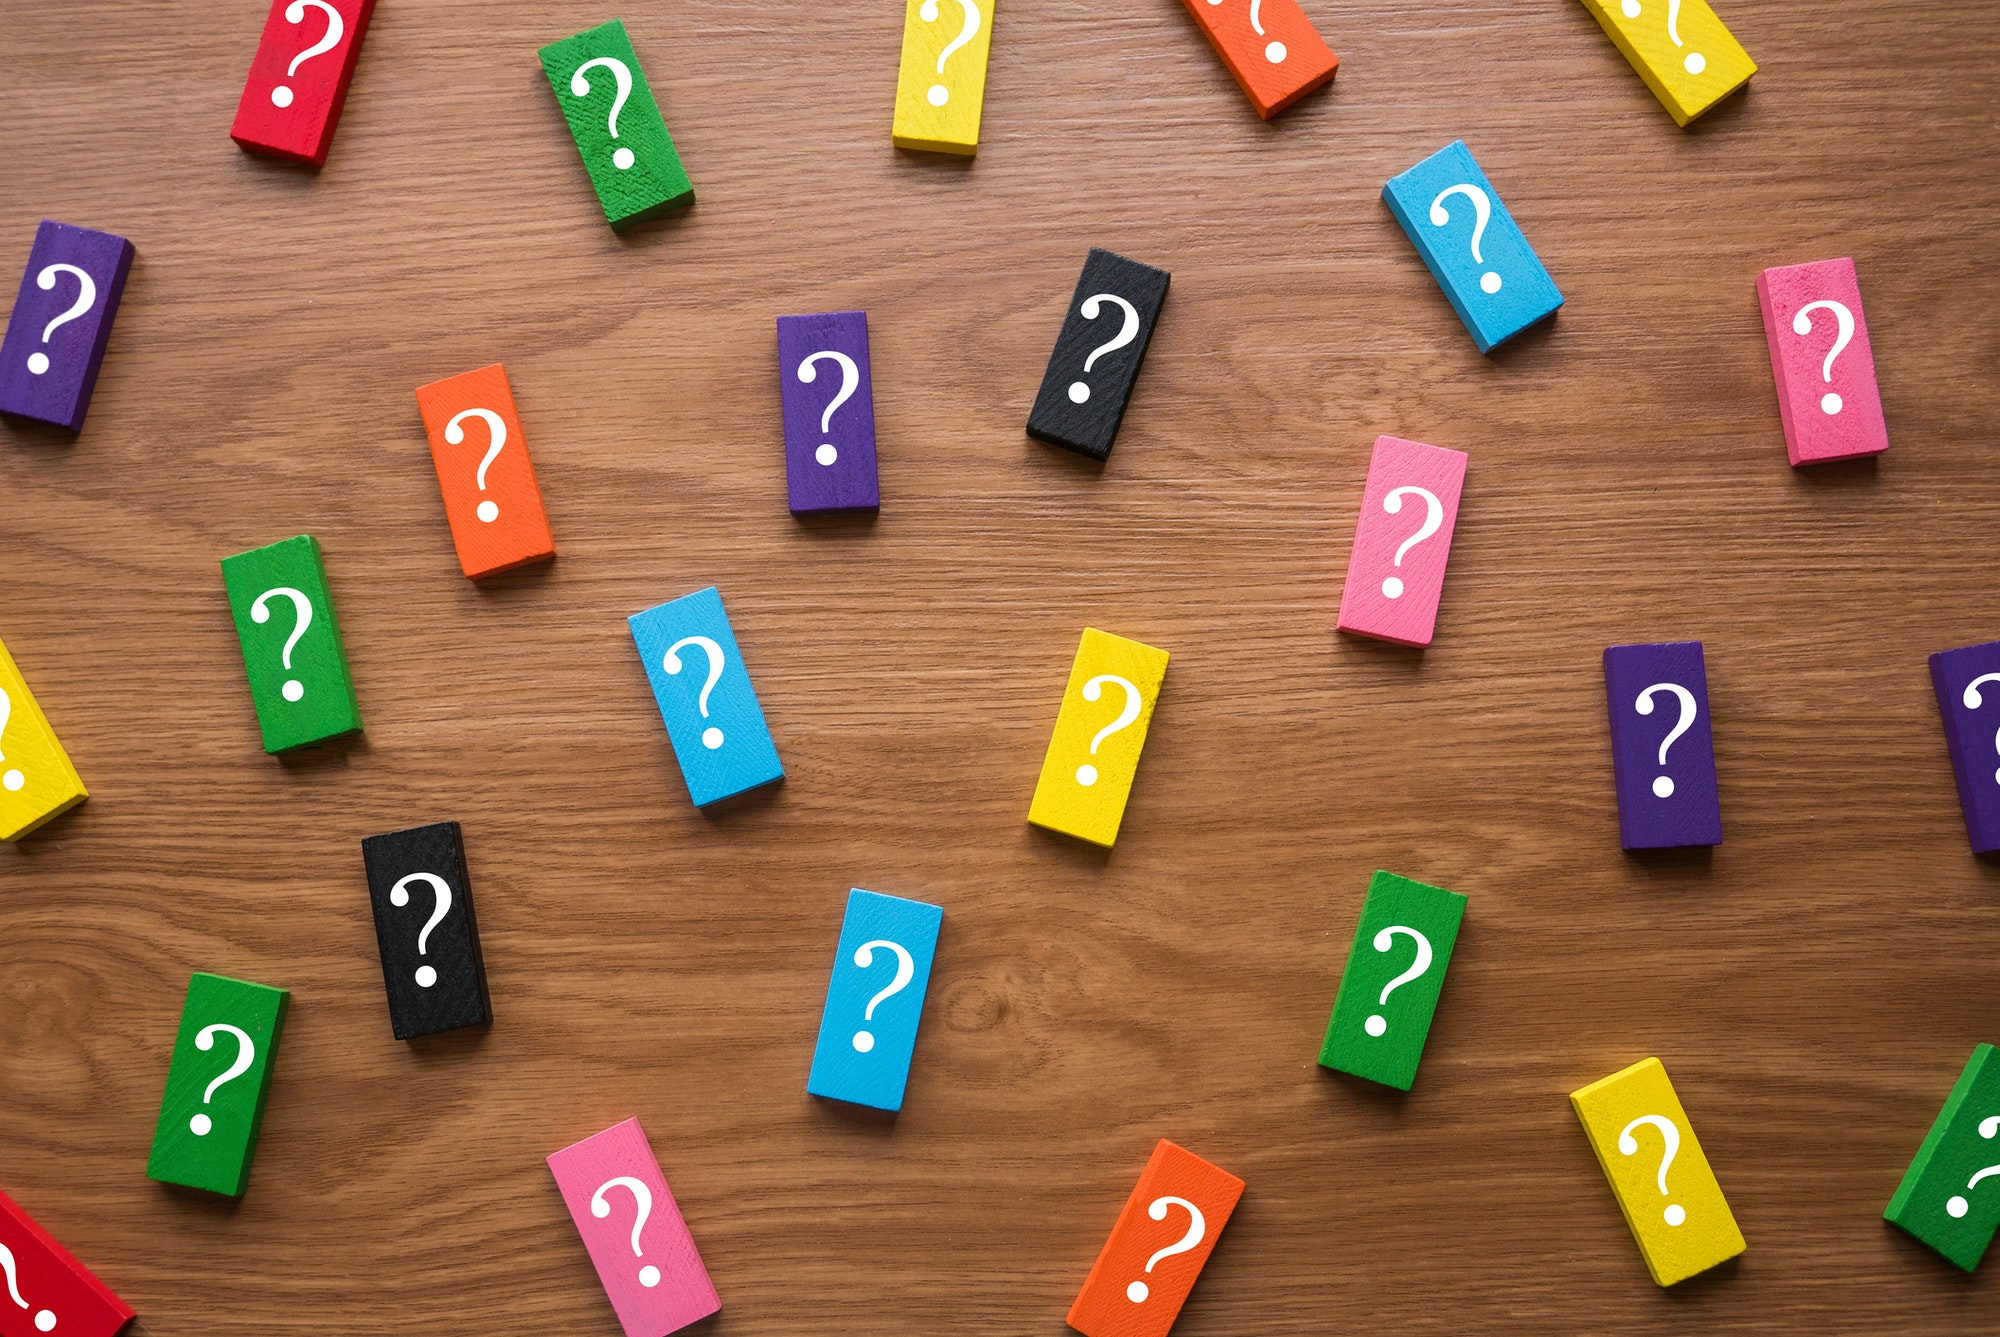 A colorful wooden block with a symbol of question on wooden background.